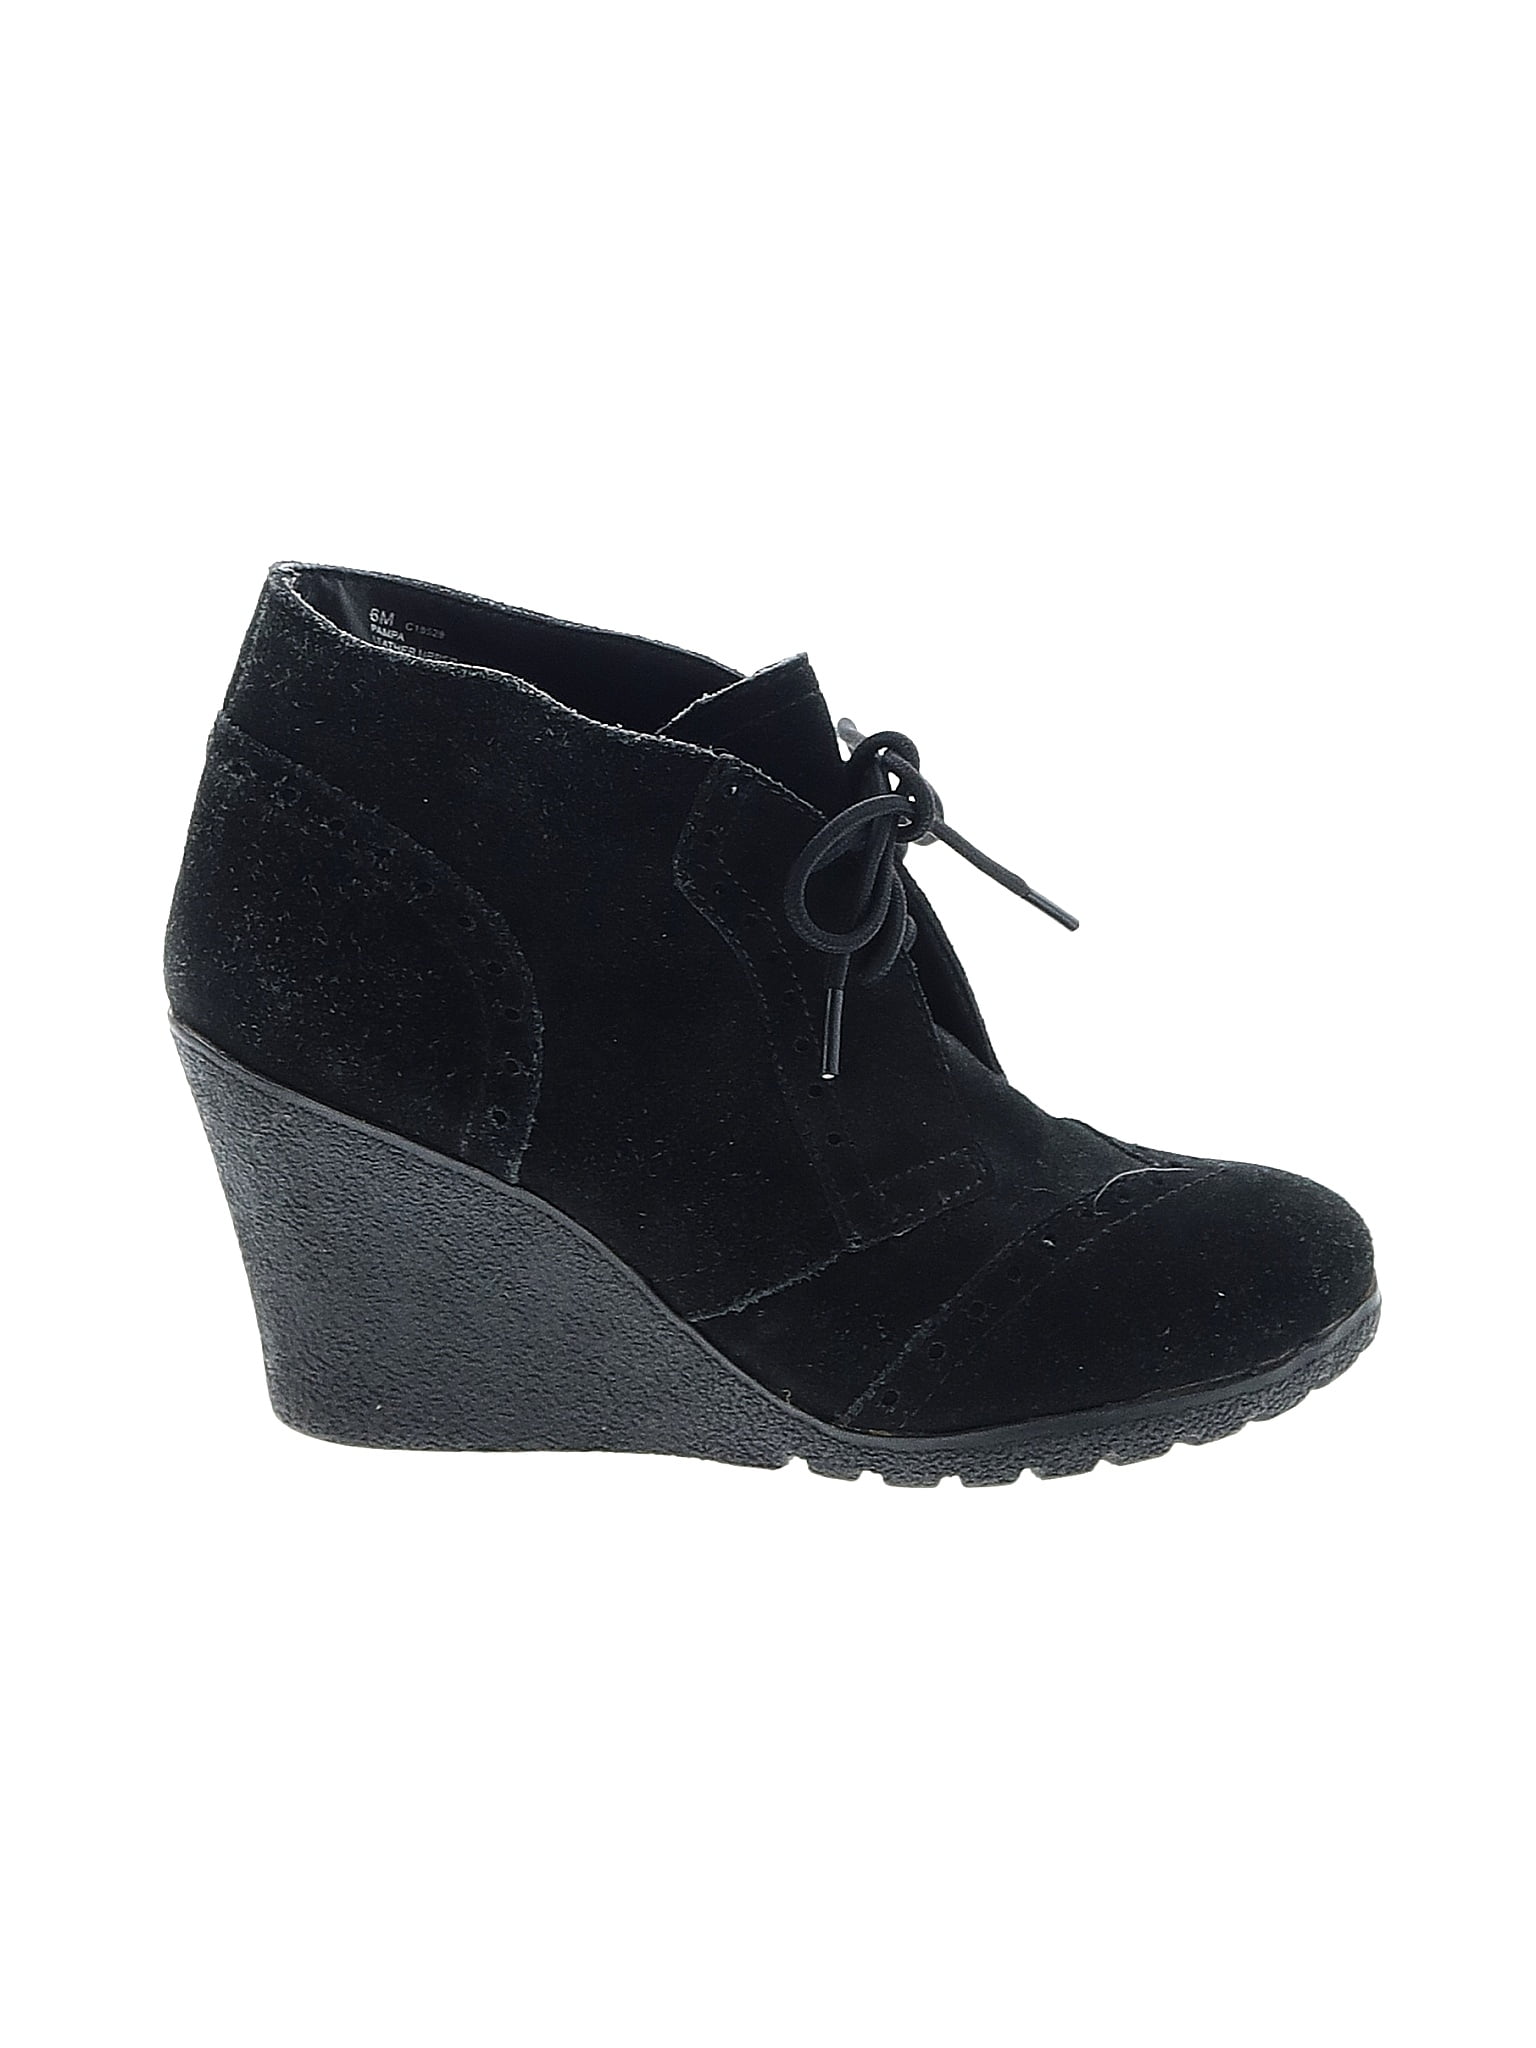 Mia Solid Black Ankle Boots Size 6 - 72% off | thredUP